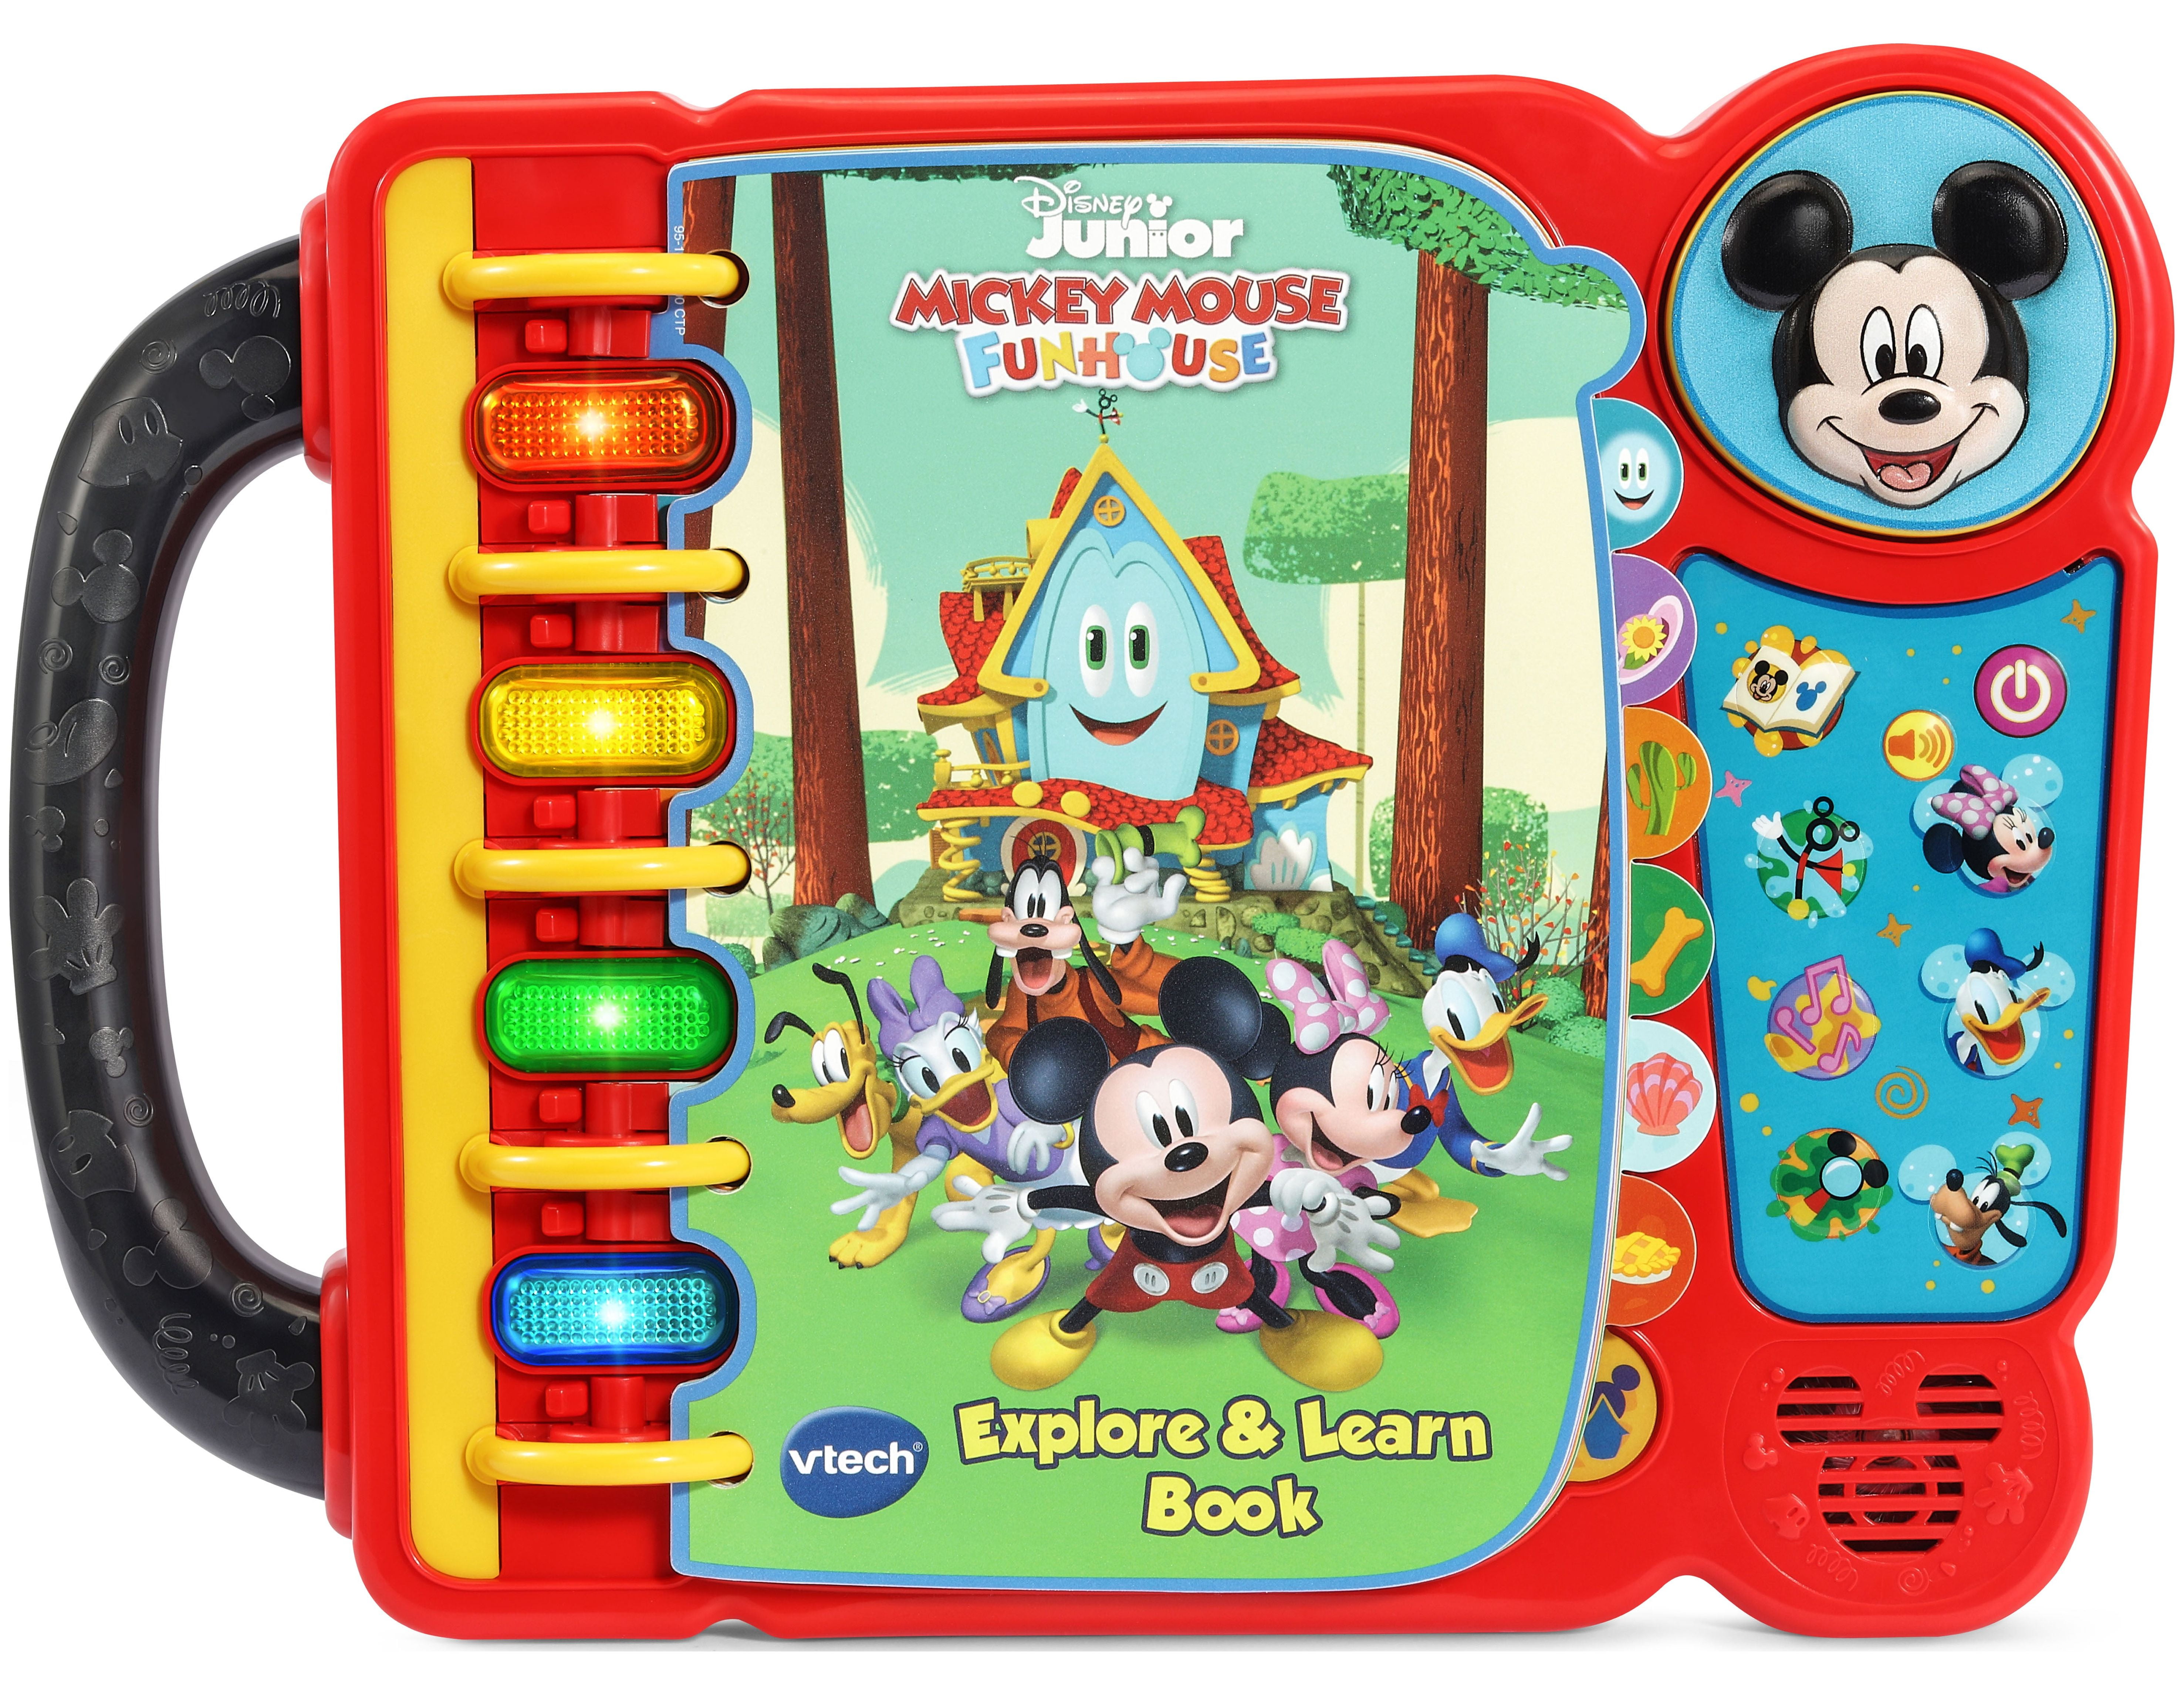 Mickey Mouse Clubhouse Toddlers Learn Colors, Shapes & Numbers